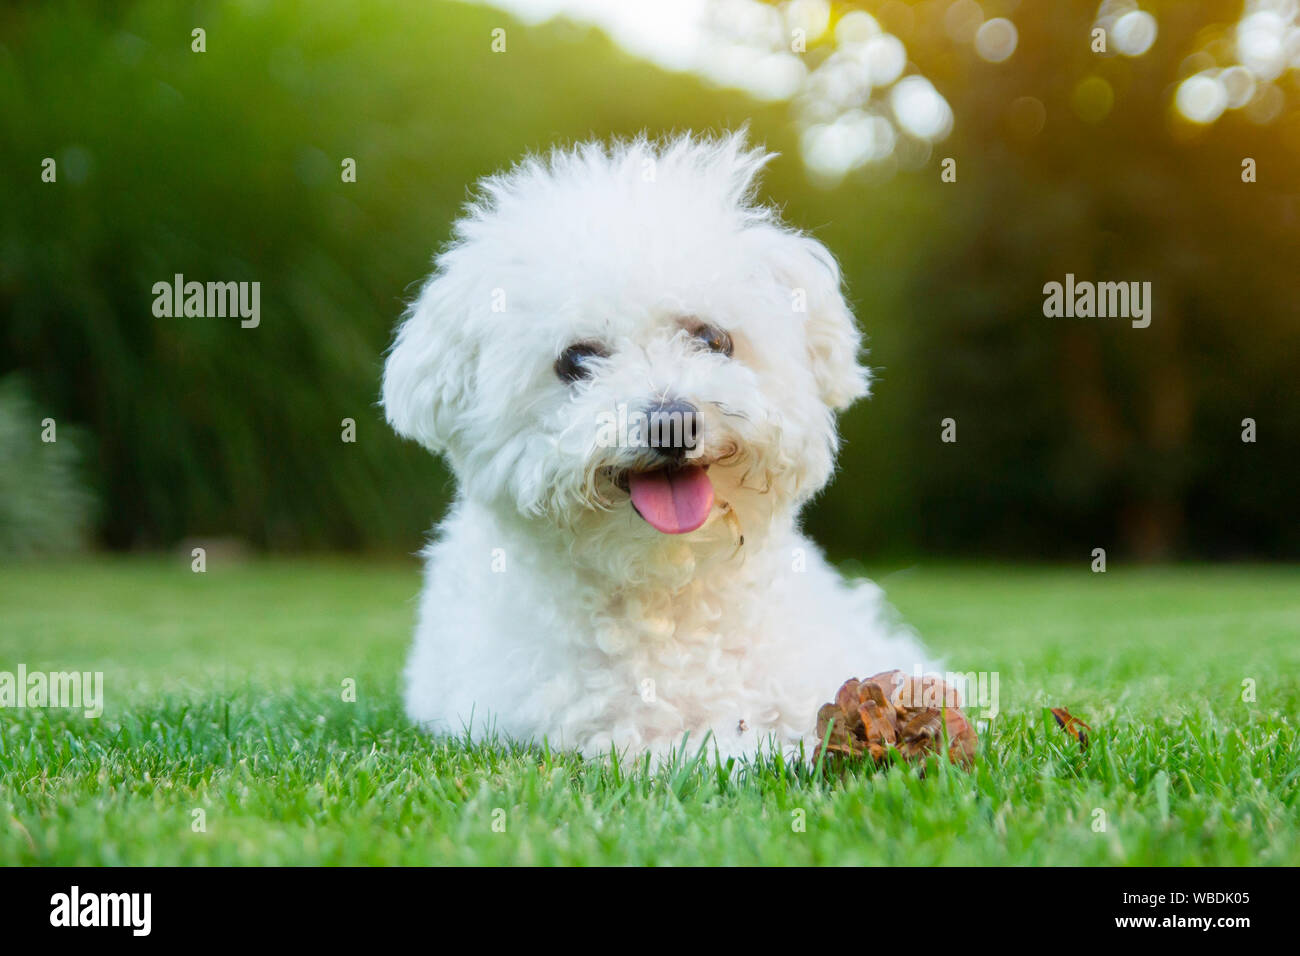 Bichon Frise dog lying on the grass with its tongue out Stock Photo